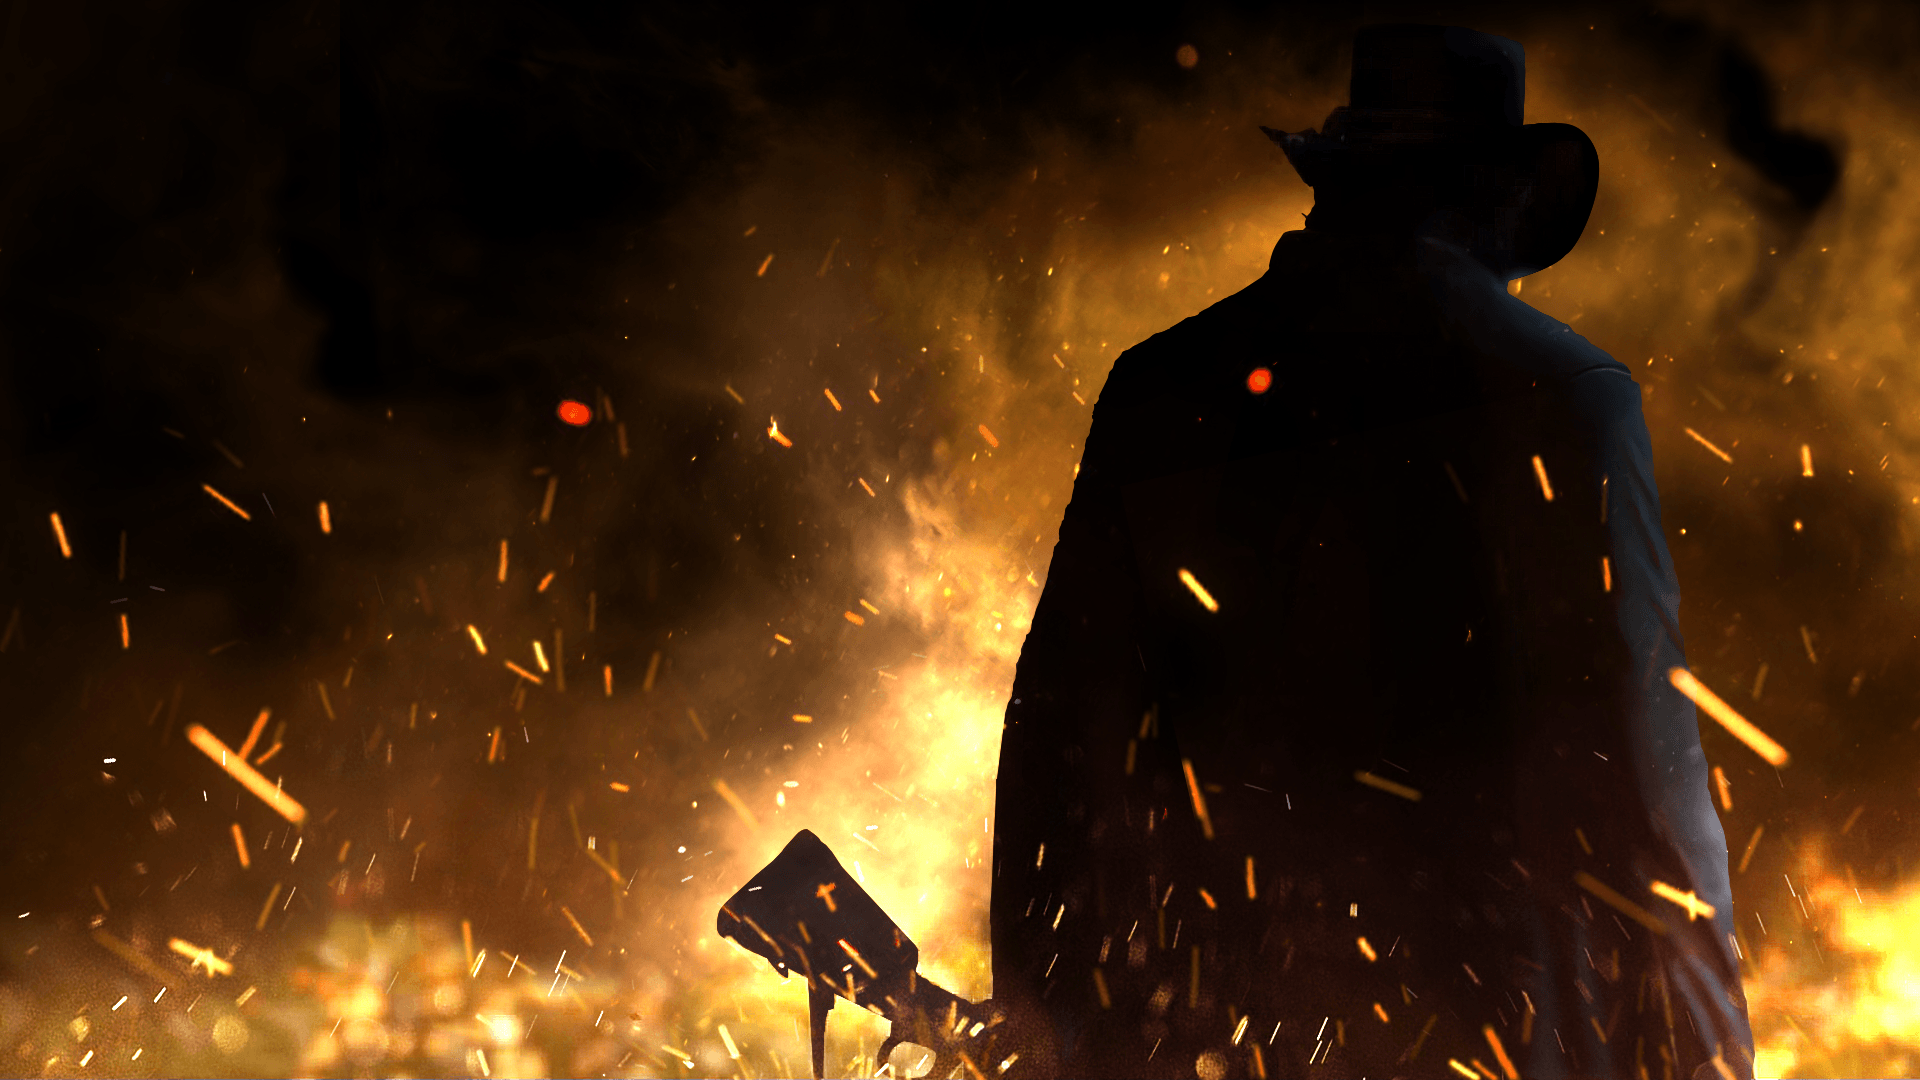 Red Dead Redemption 2 Wallpaper Pc .itl.cat